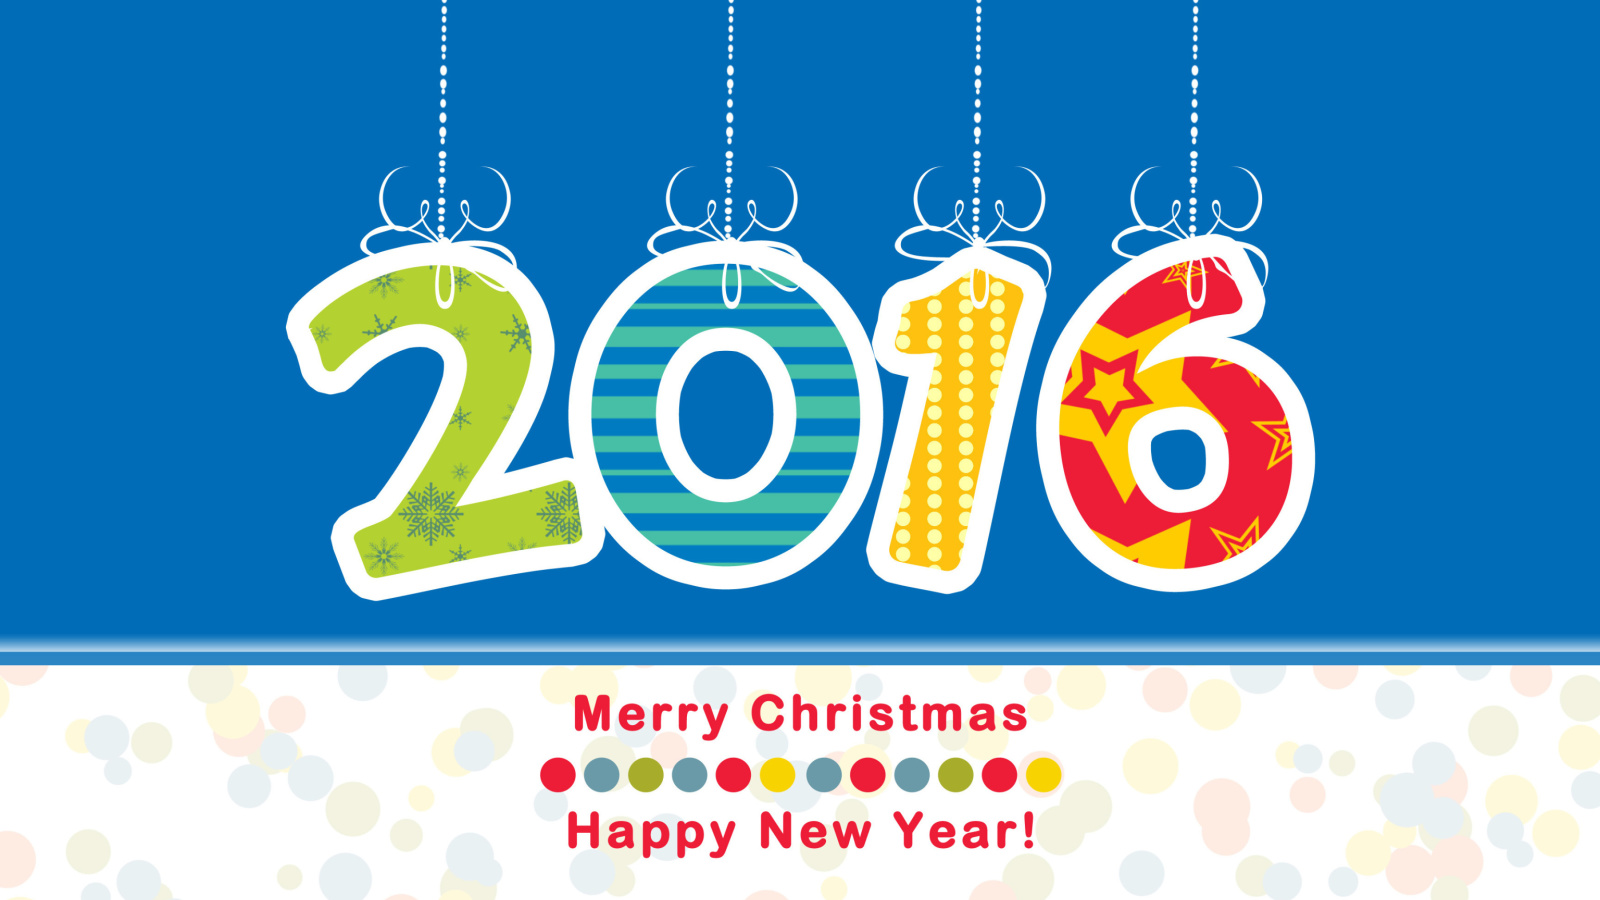 Colorful New Year 2016 Greetings wallpaper 1600x900